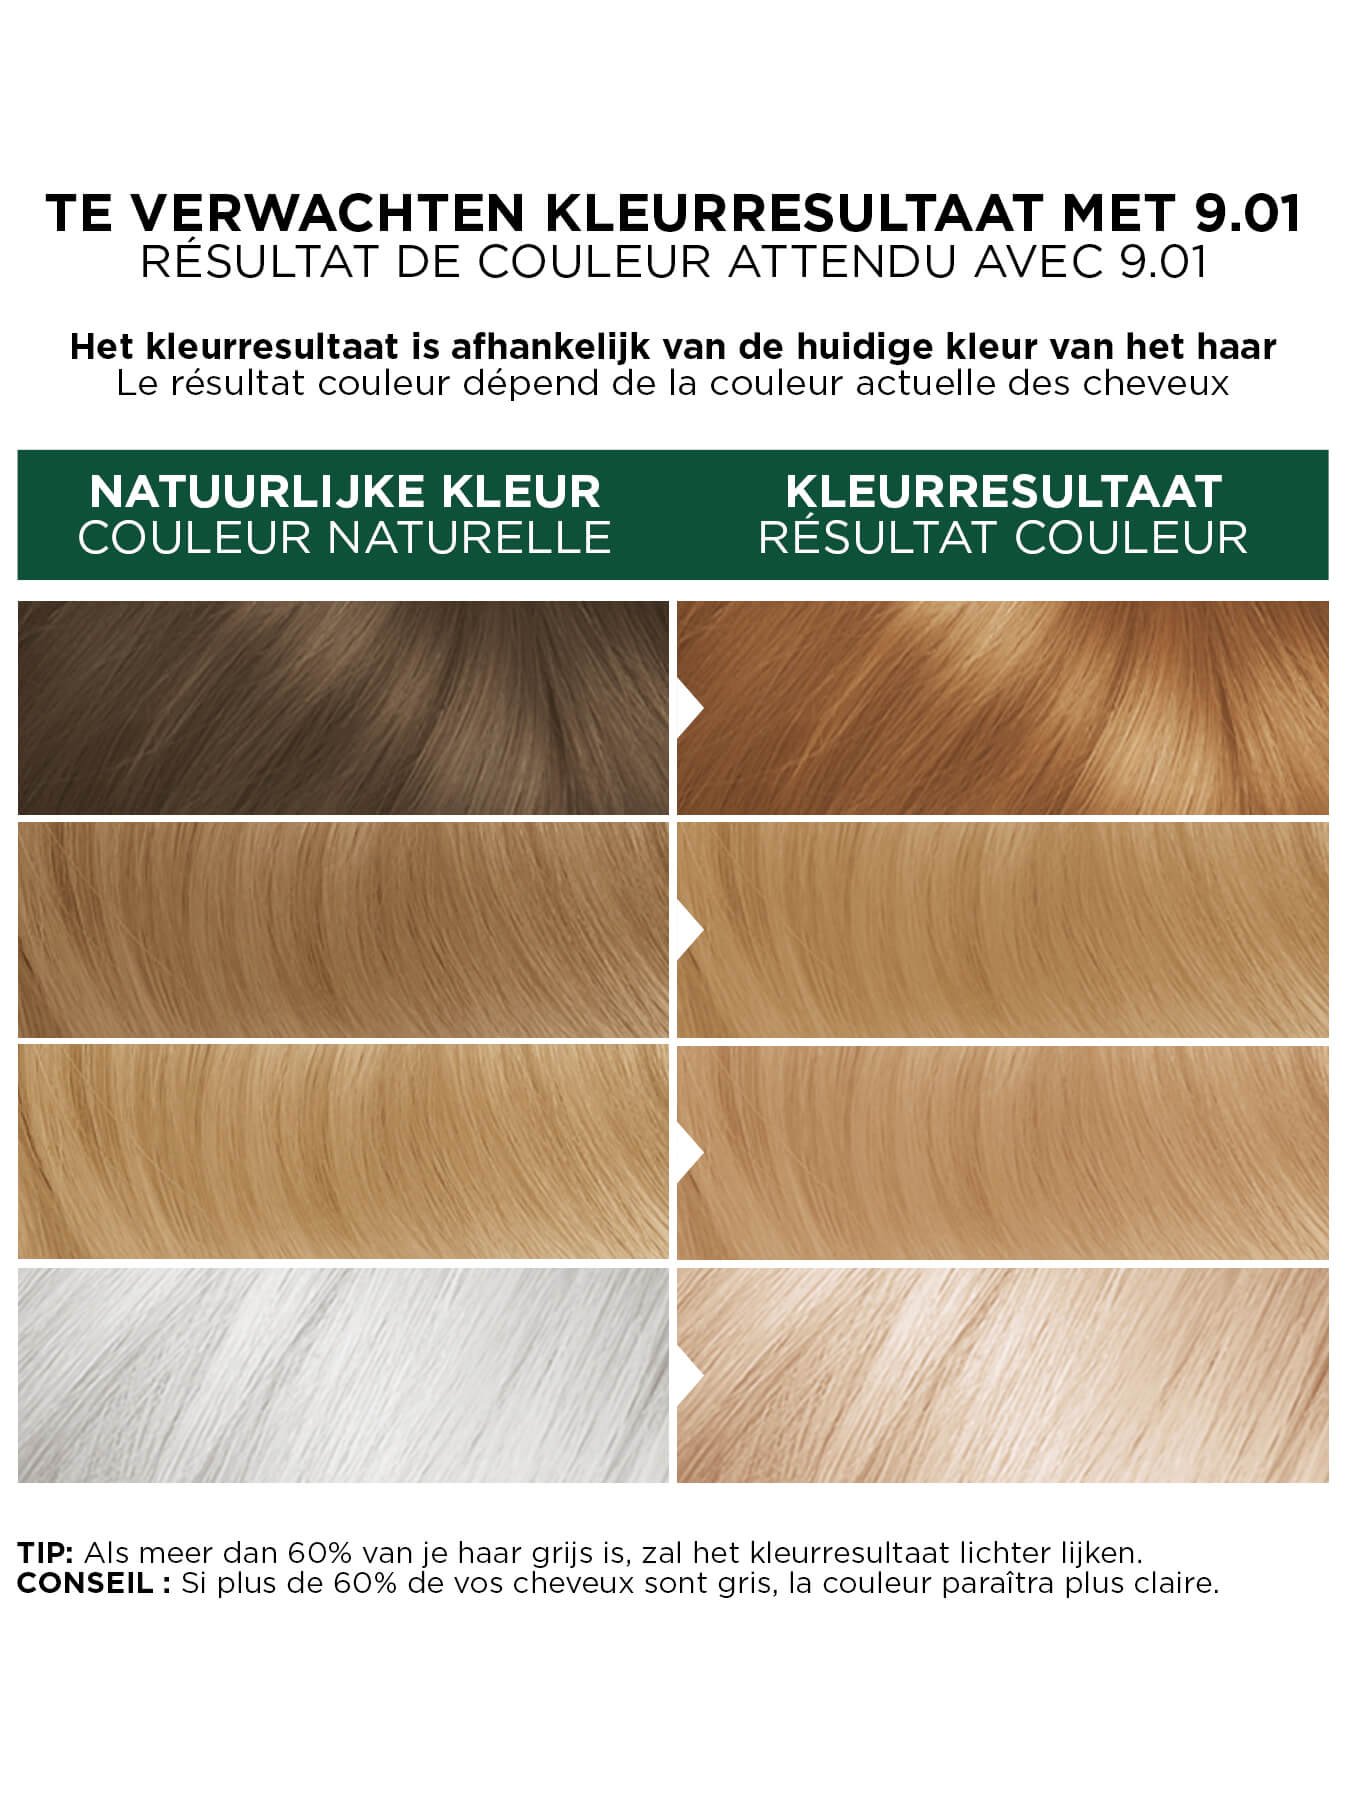 8127170 Belle Color Naturals Resizing 9 01 BE 1350x1800pxjpg master